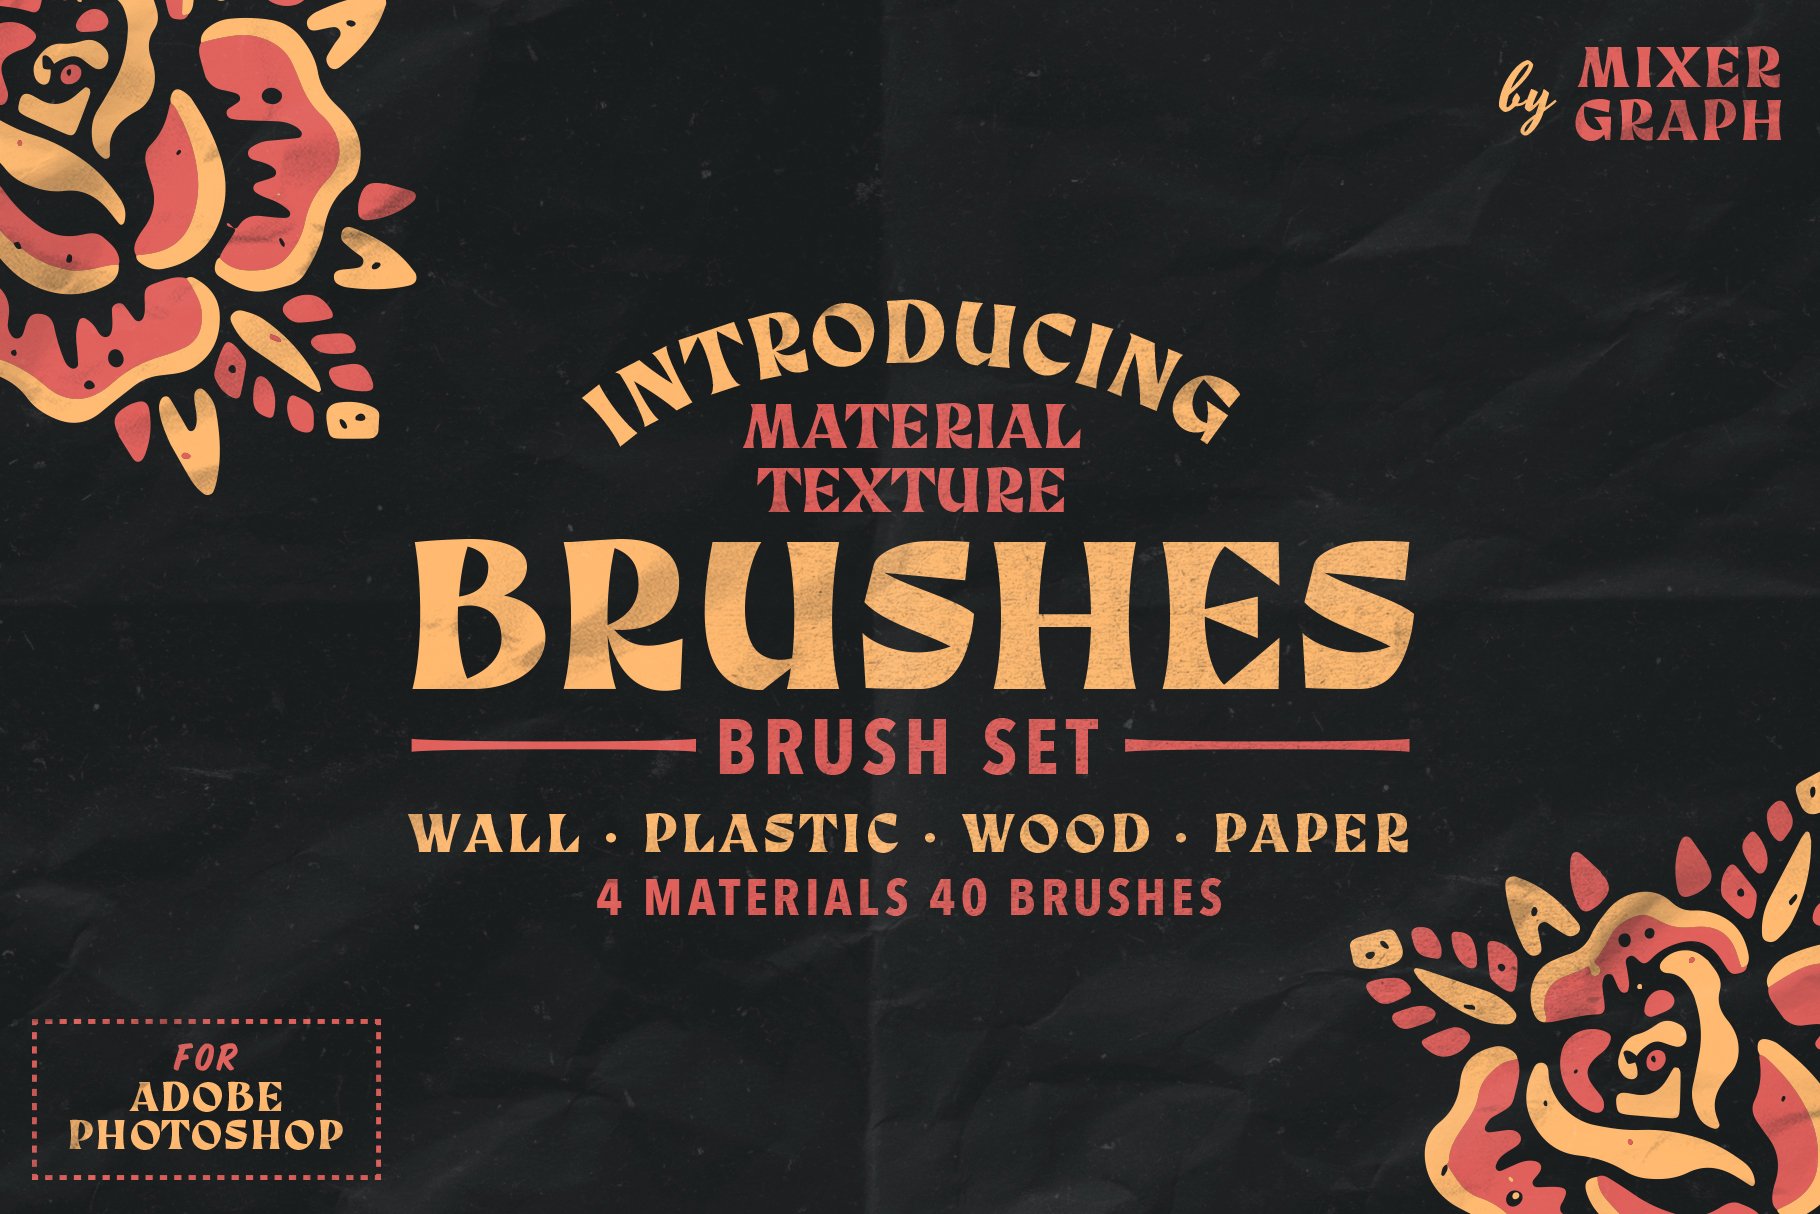 Material Texture Brushes Photoshopcover image.